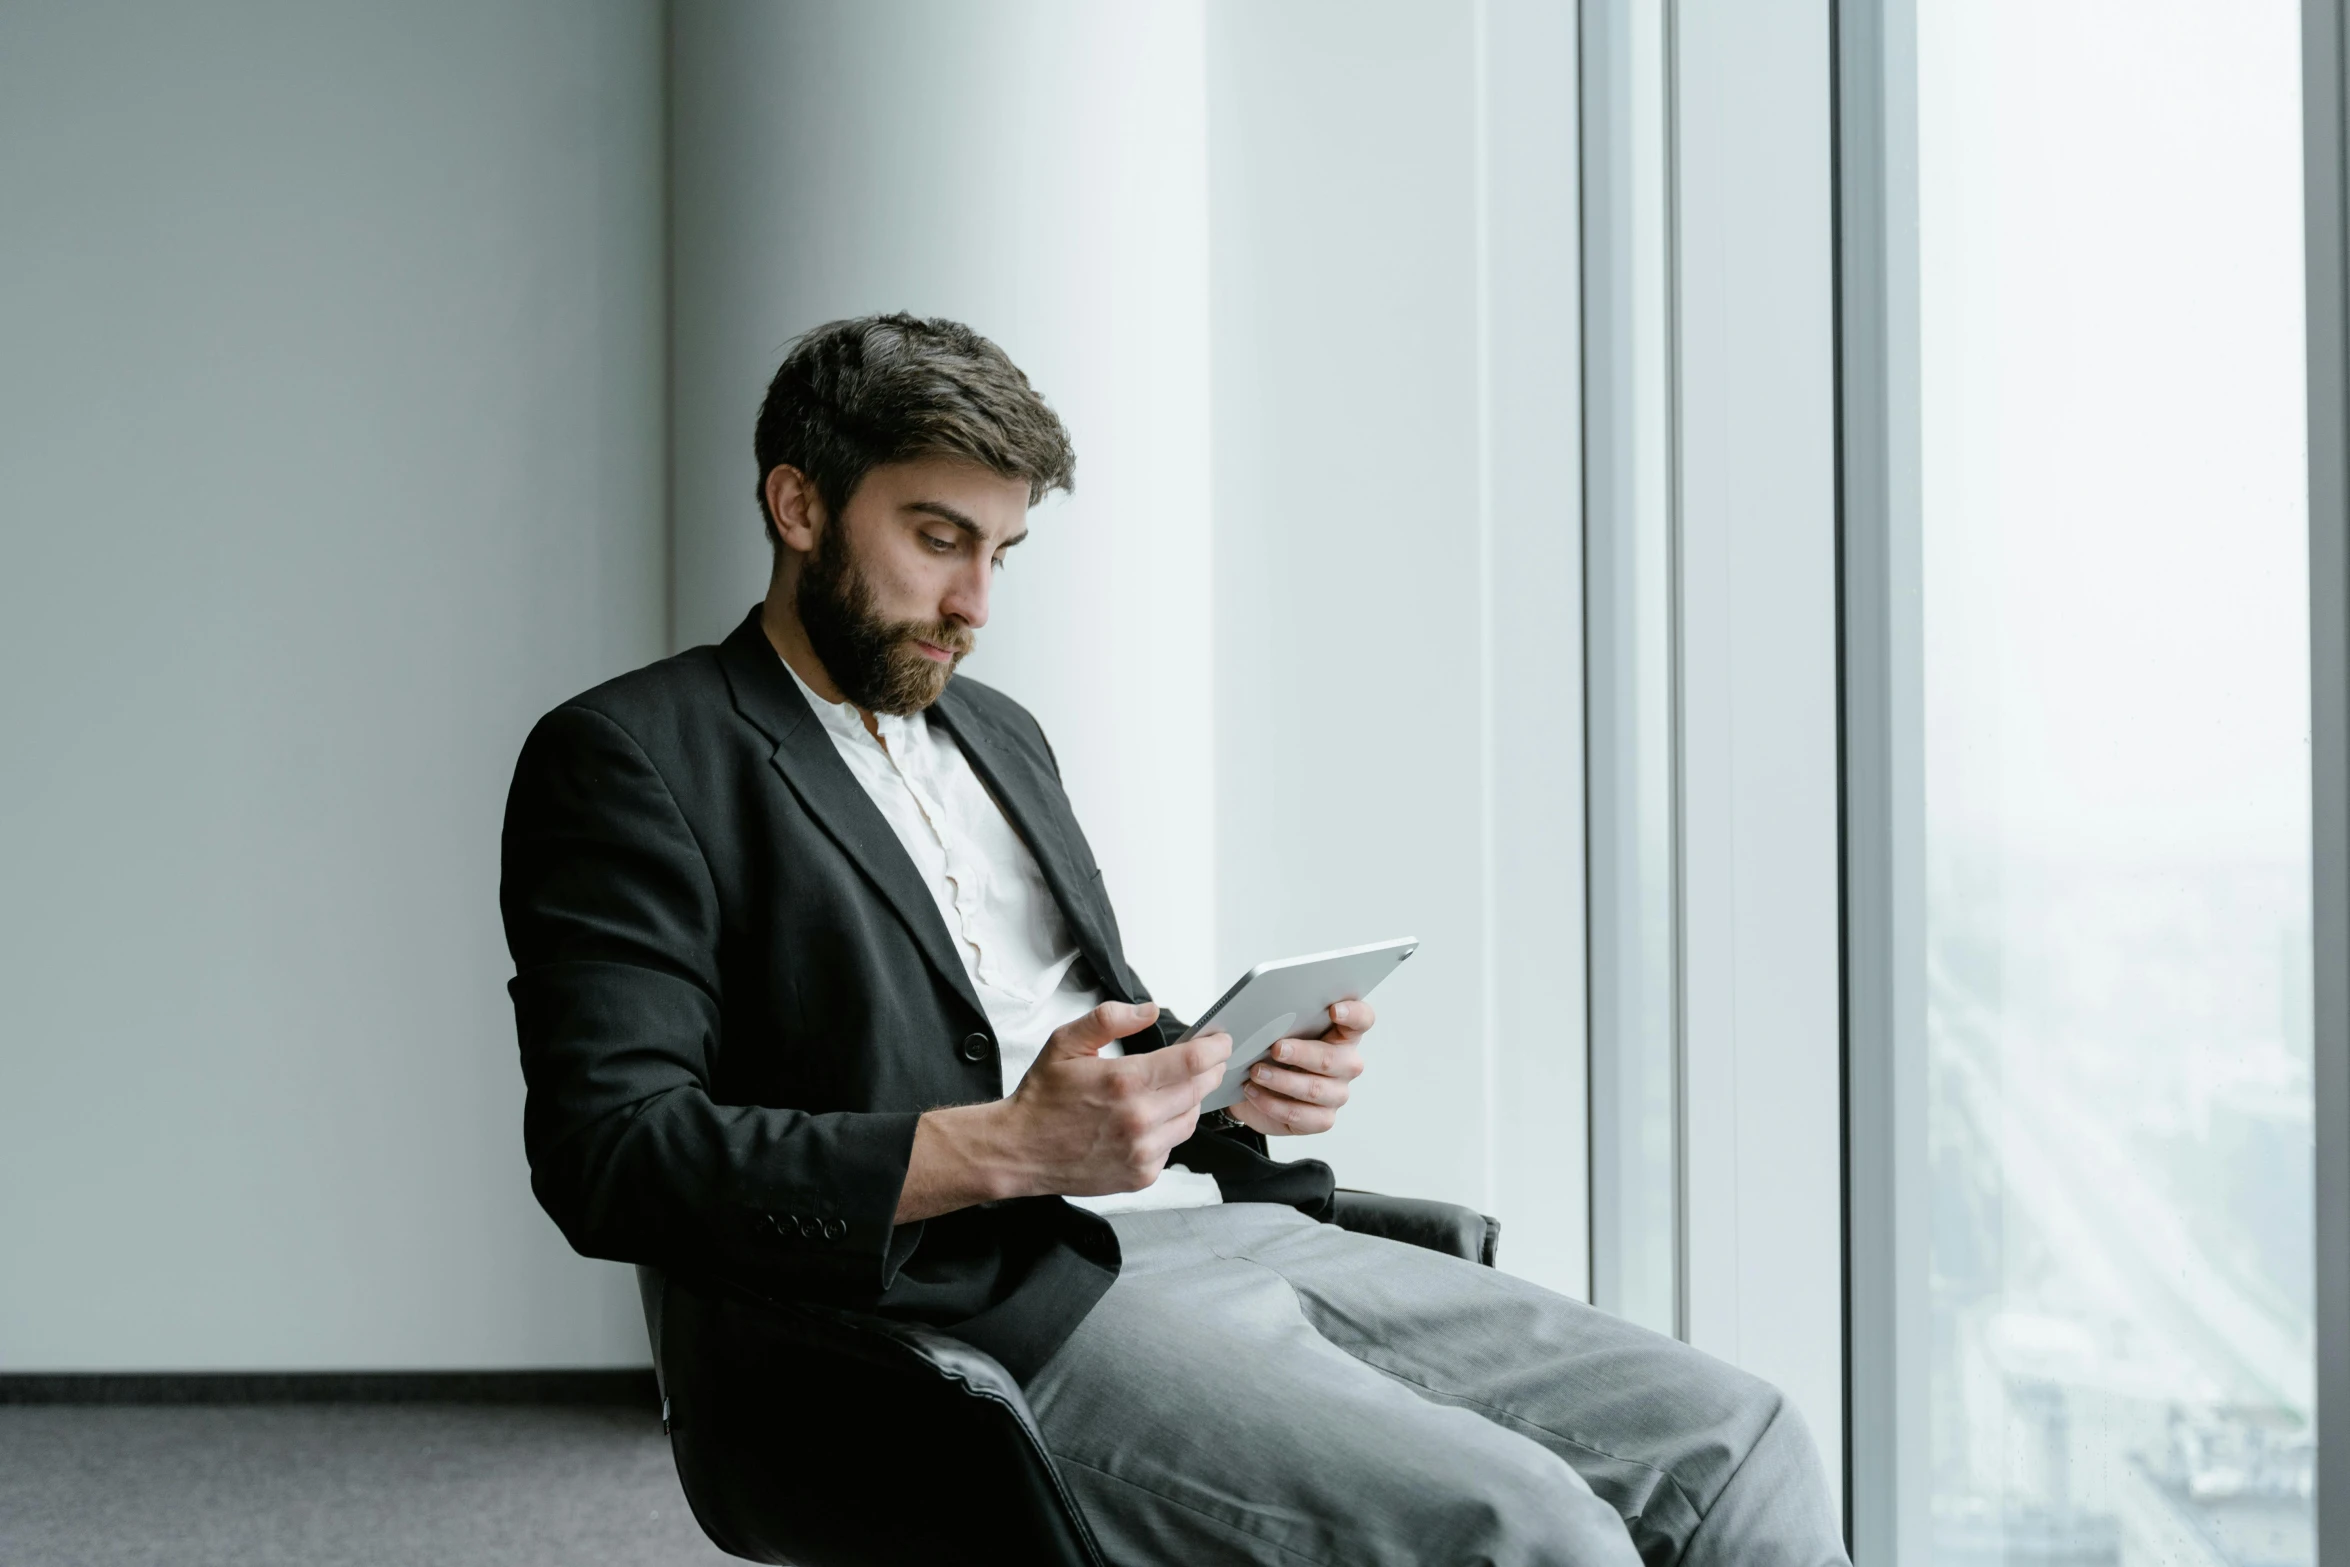 a man sitting in a chair looking at a tablet, pexels contest winner, wearing causal black suits, it specialist, link from zelda using computer, man with beard